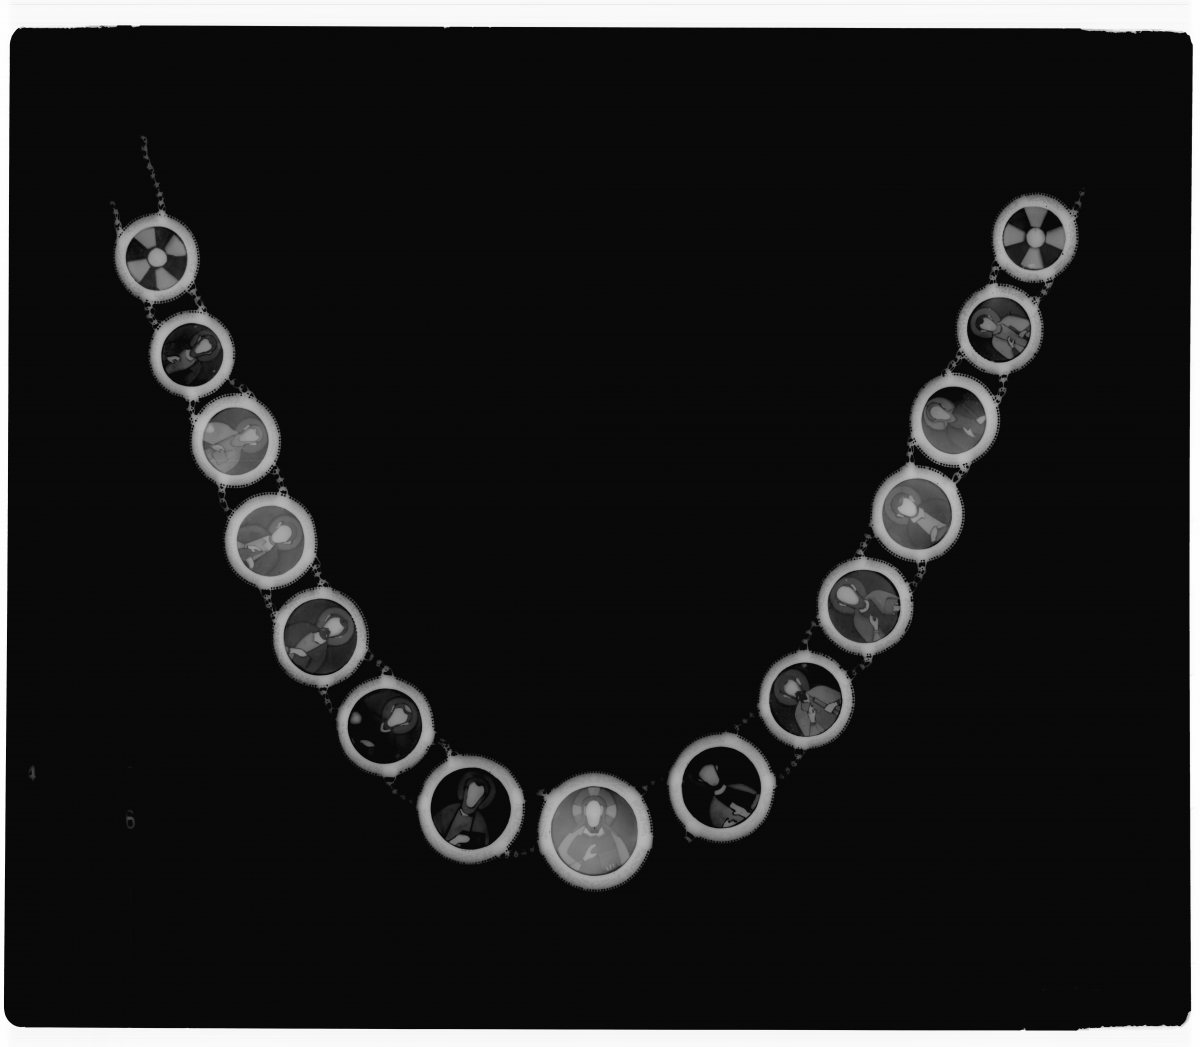 A black and white image of a necklace that has been radiographed